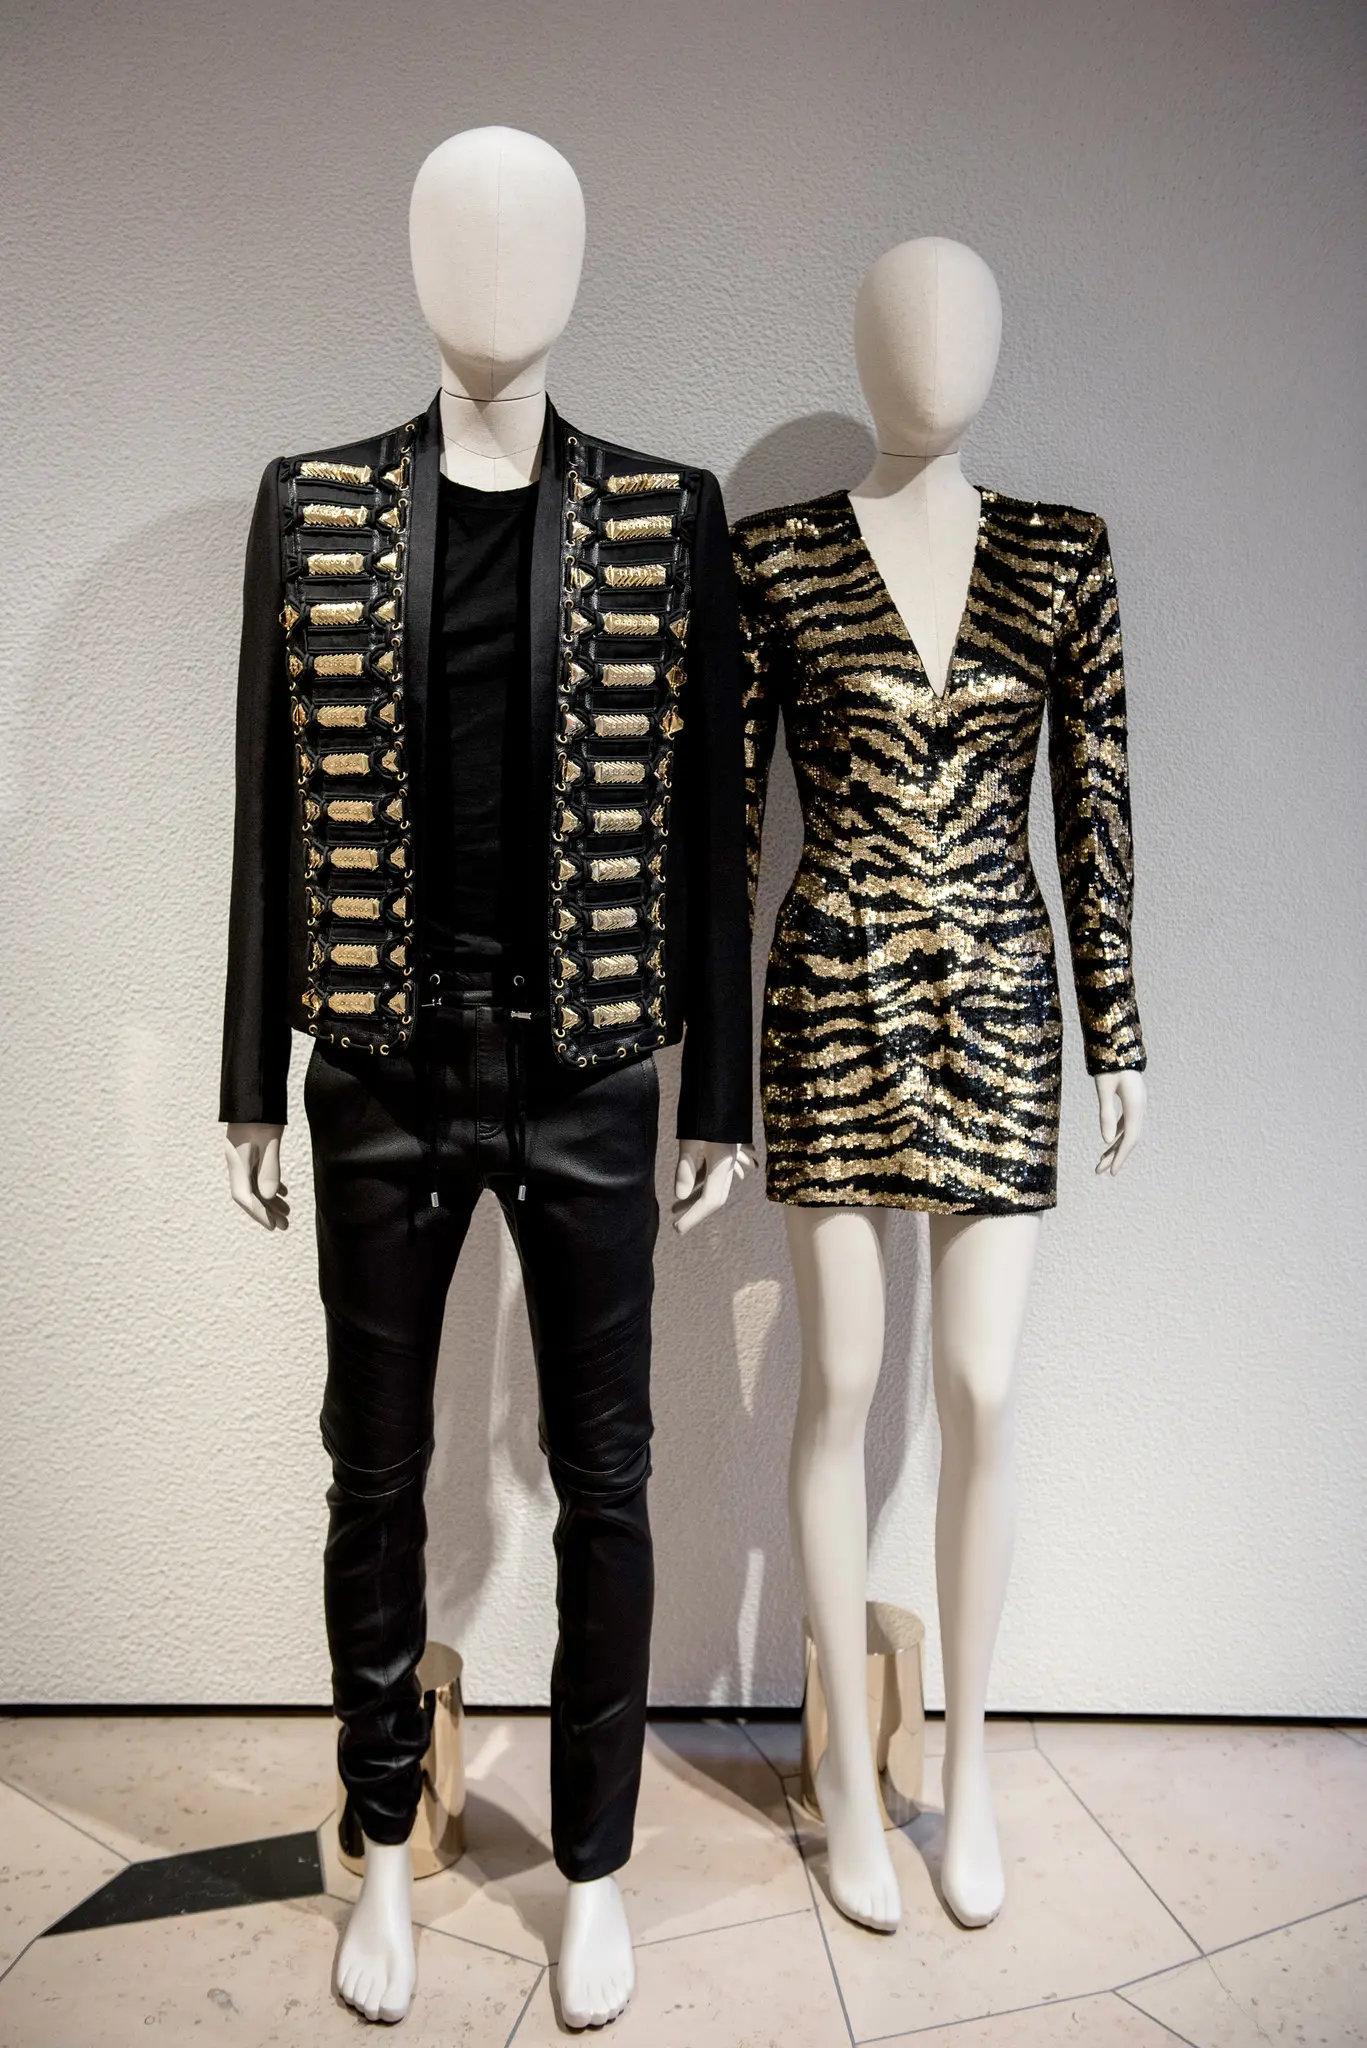 BALMAIN SEQUINED TIGER-STRIPE MINI DRESS in BLACK and GOLD Sz FR 36 For Sale 4